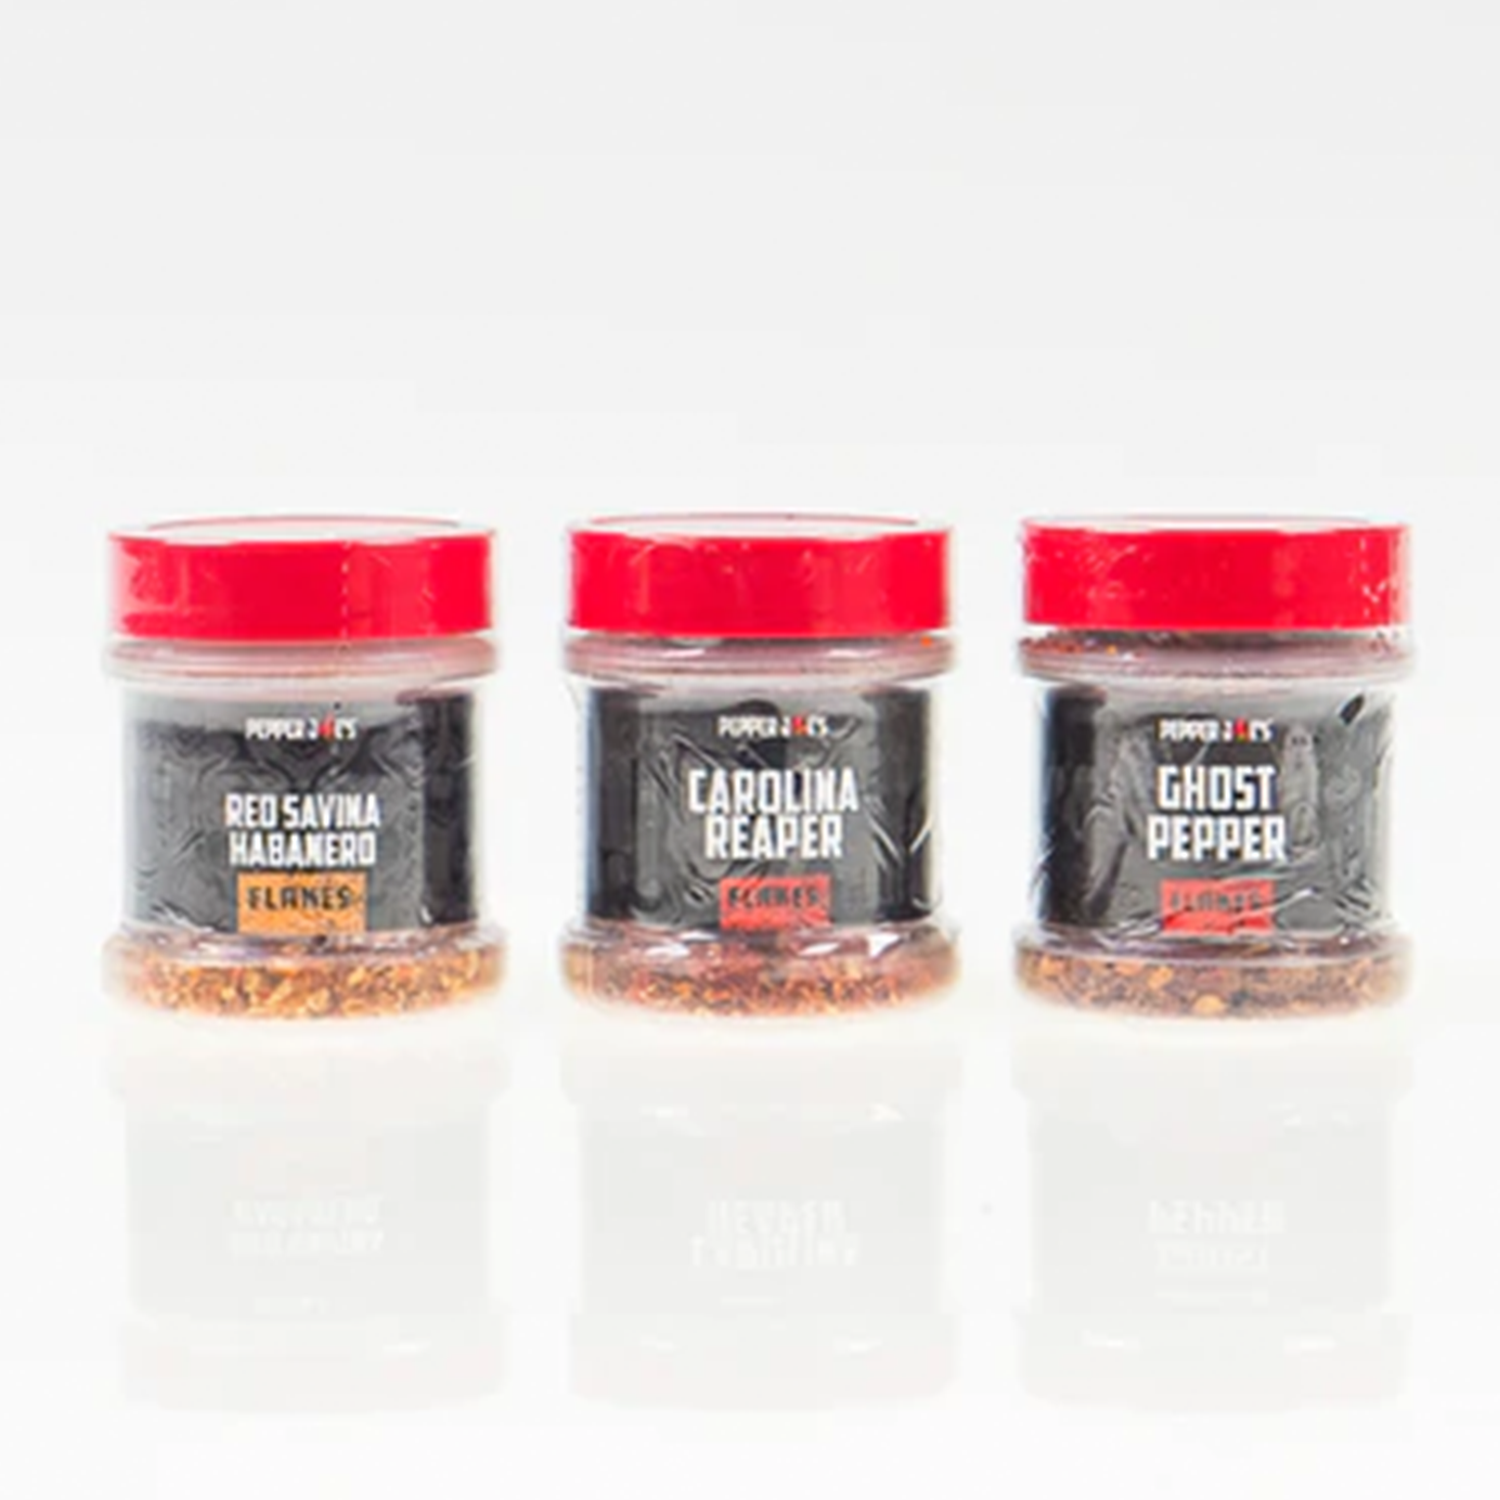 Pepper Joe's world's hottest pepper flakes collection - three hot peppers flakes lined up next to each other 